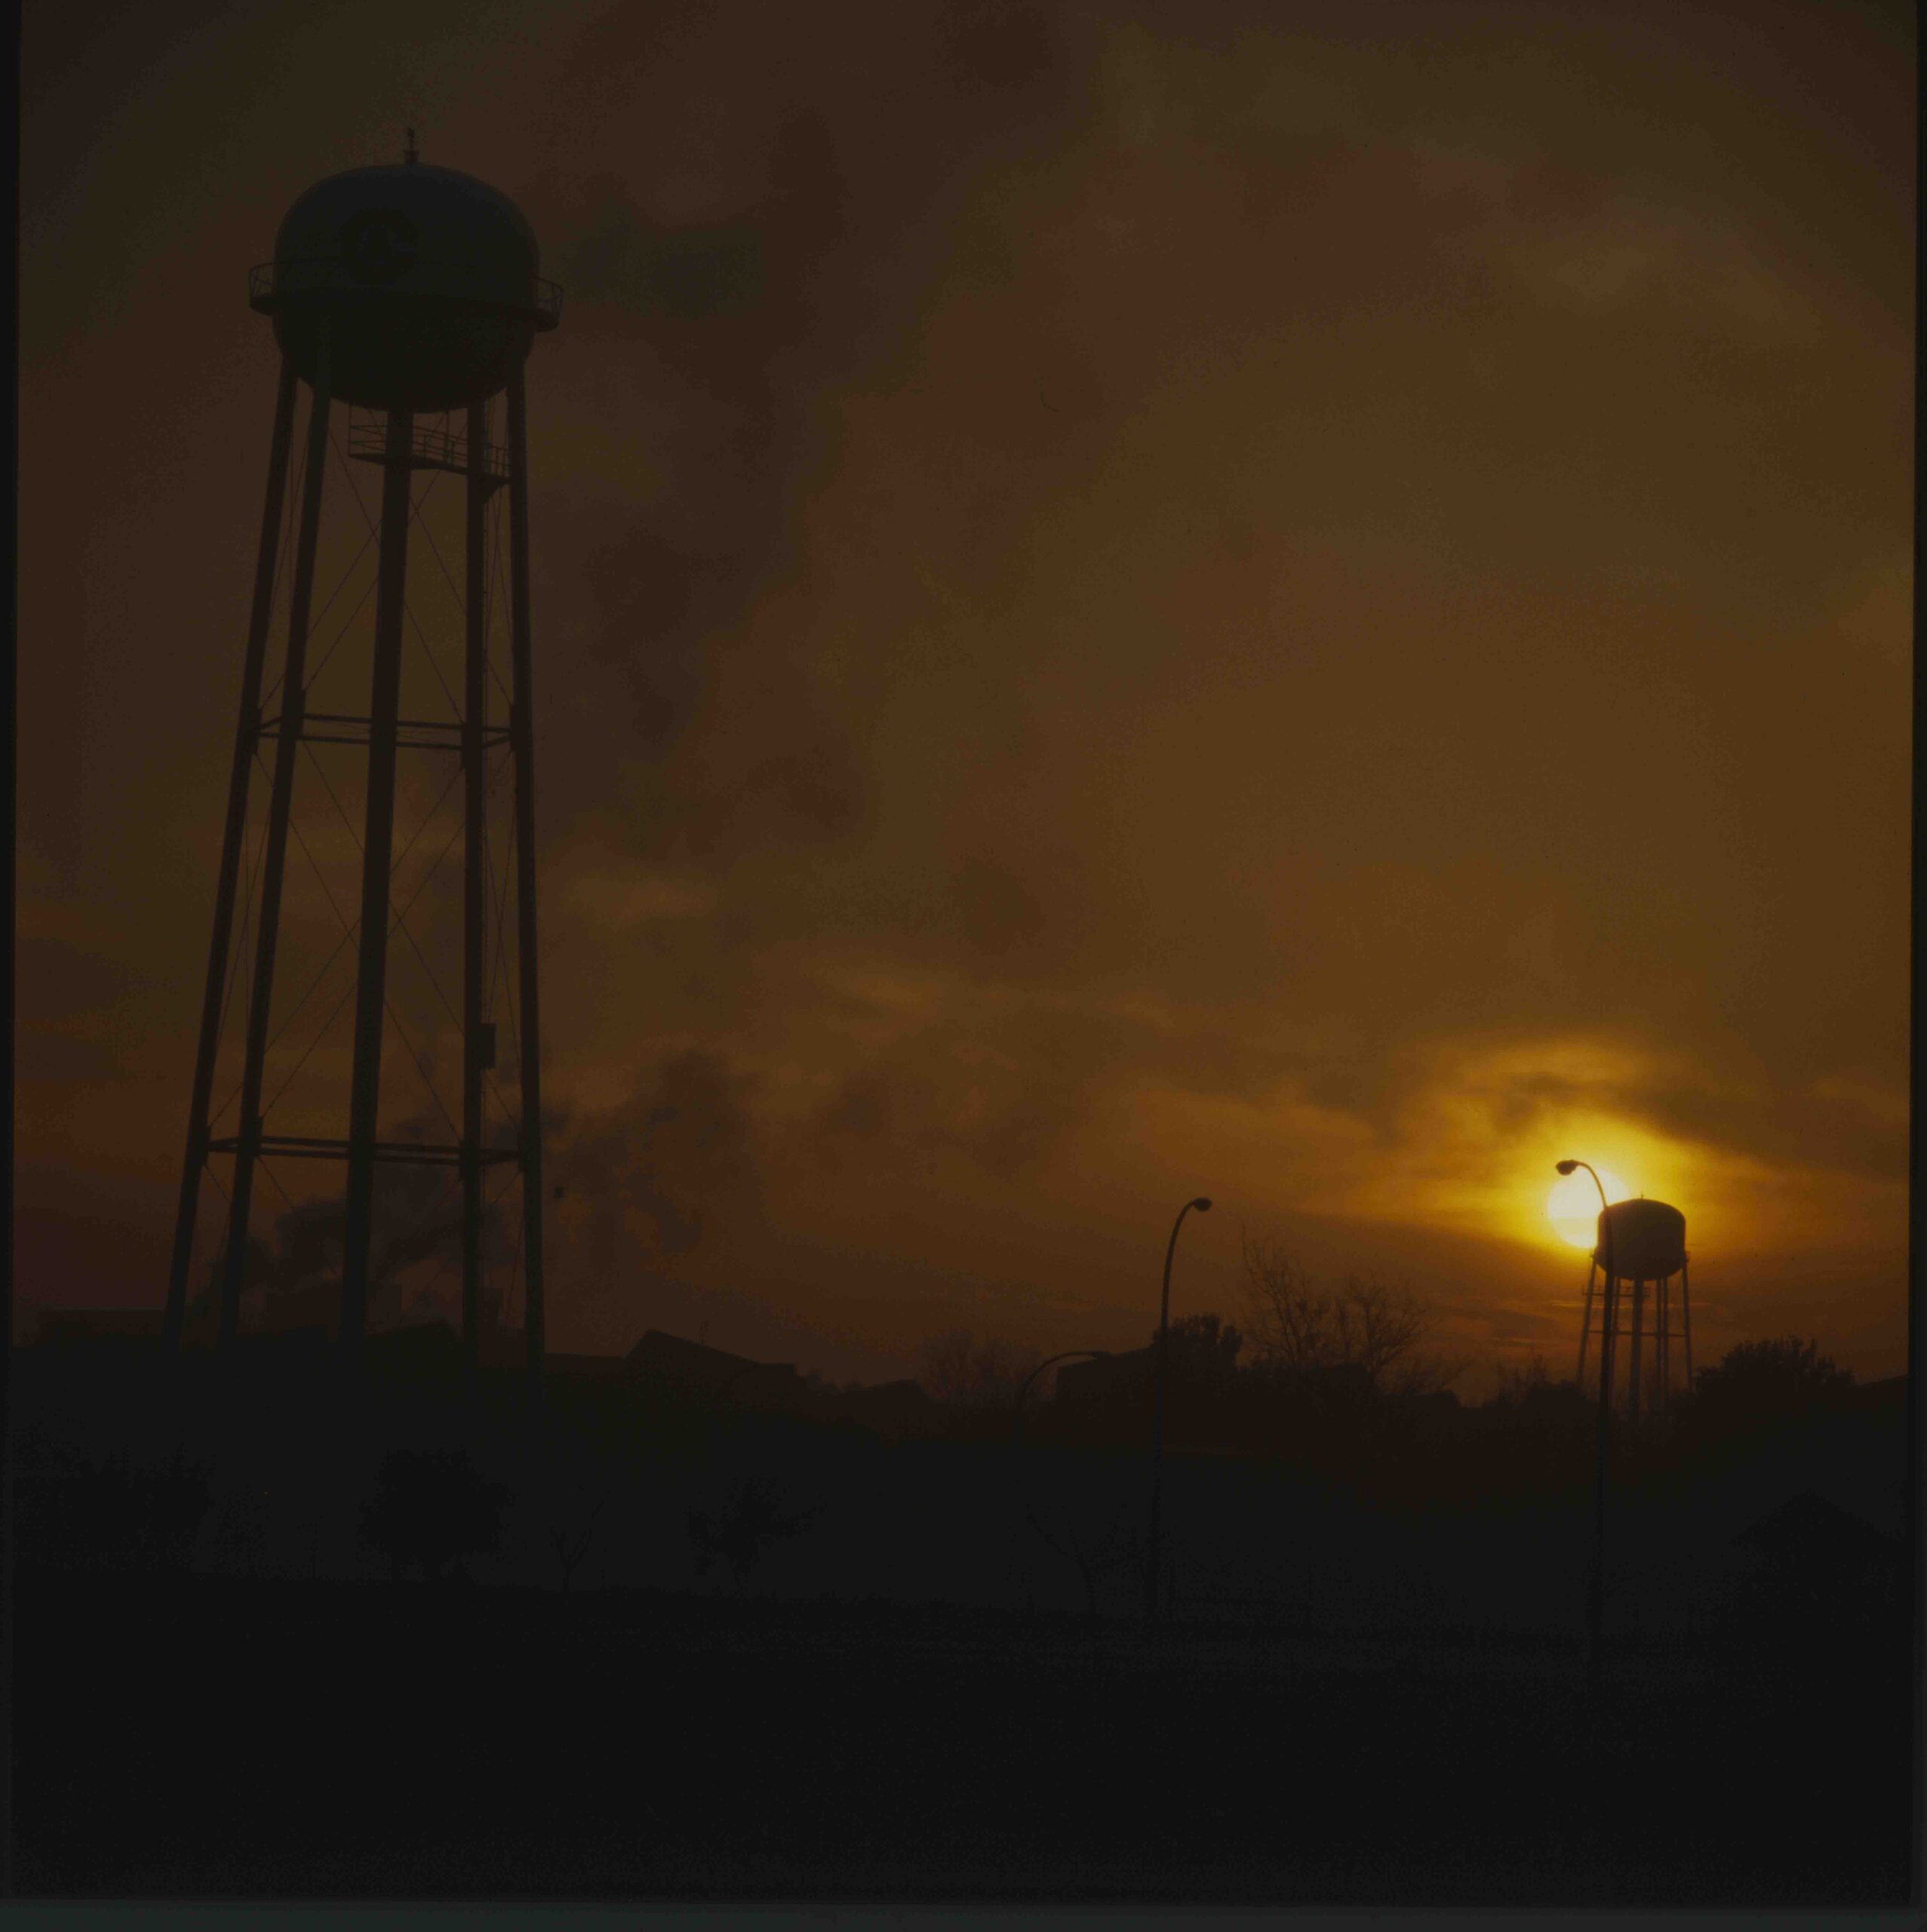 Two water towers at sunset